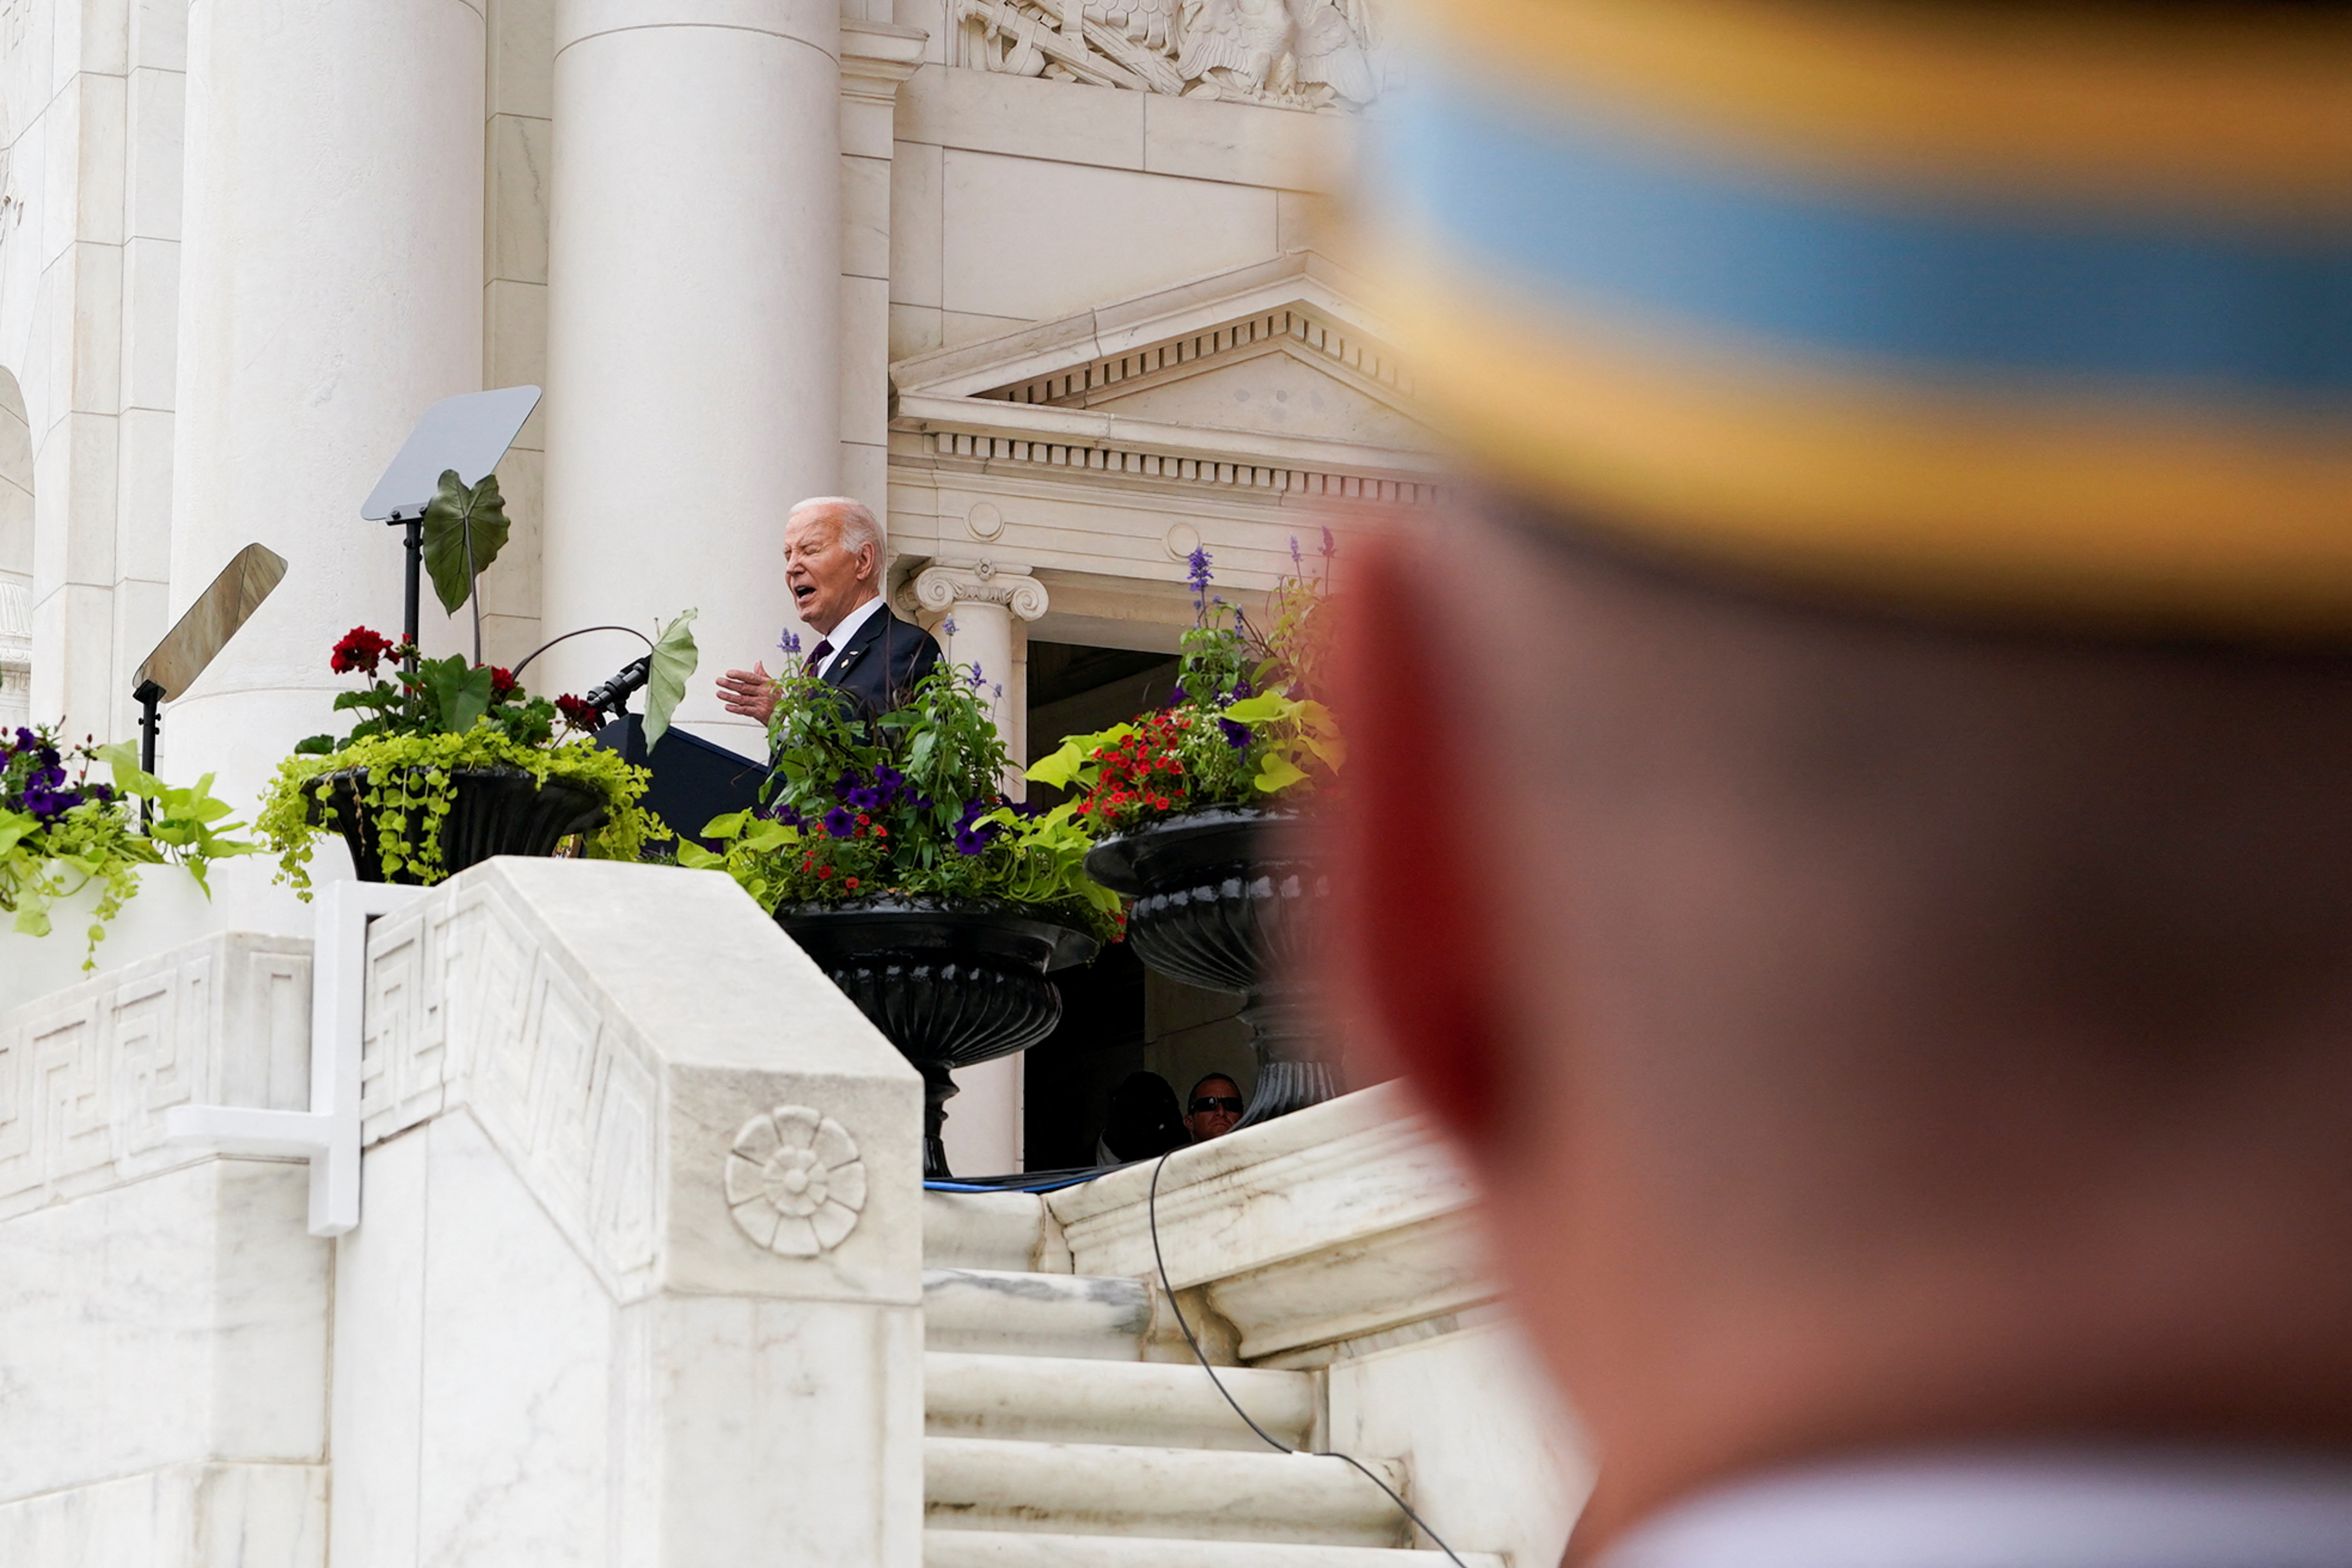 National Memorial Day Wreath-Laying and Observance Ceremony at Arlington National Cemetery, in Washington